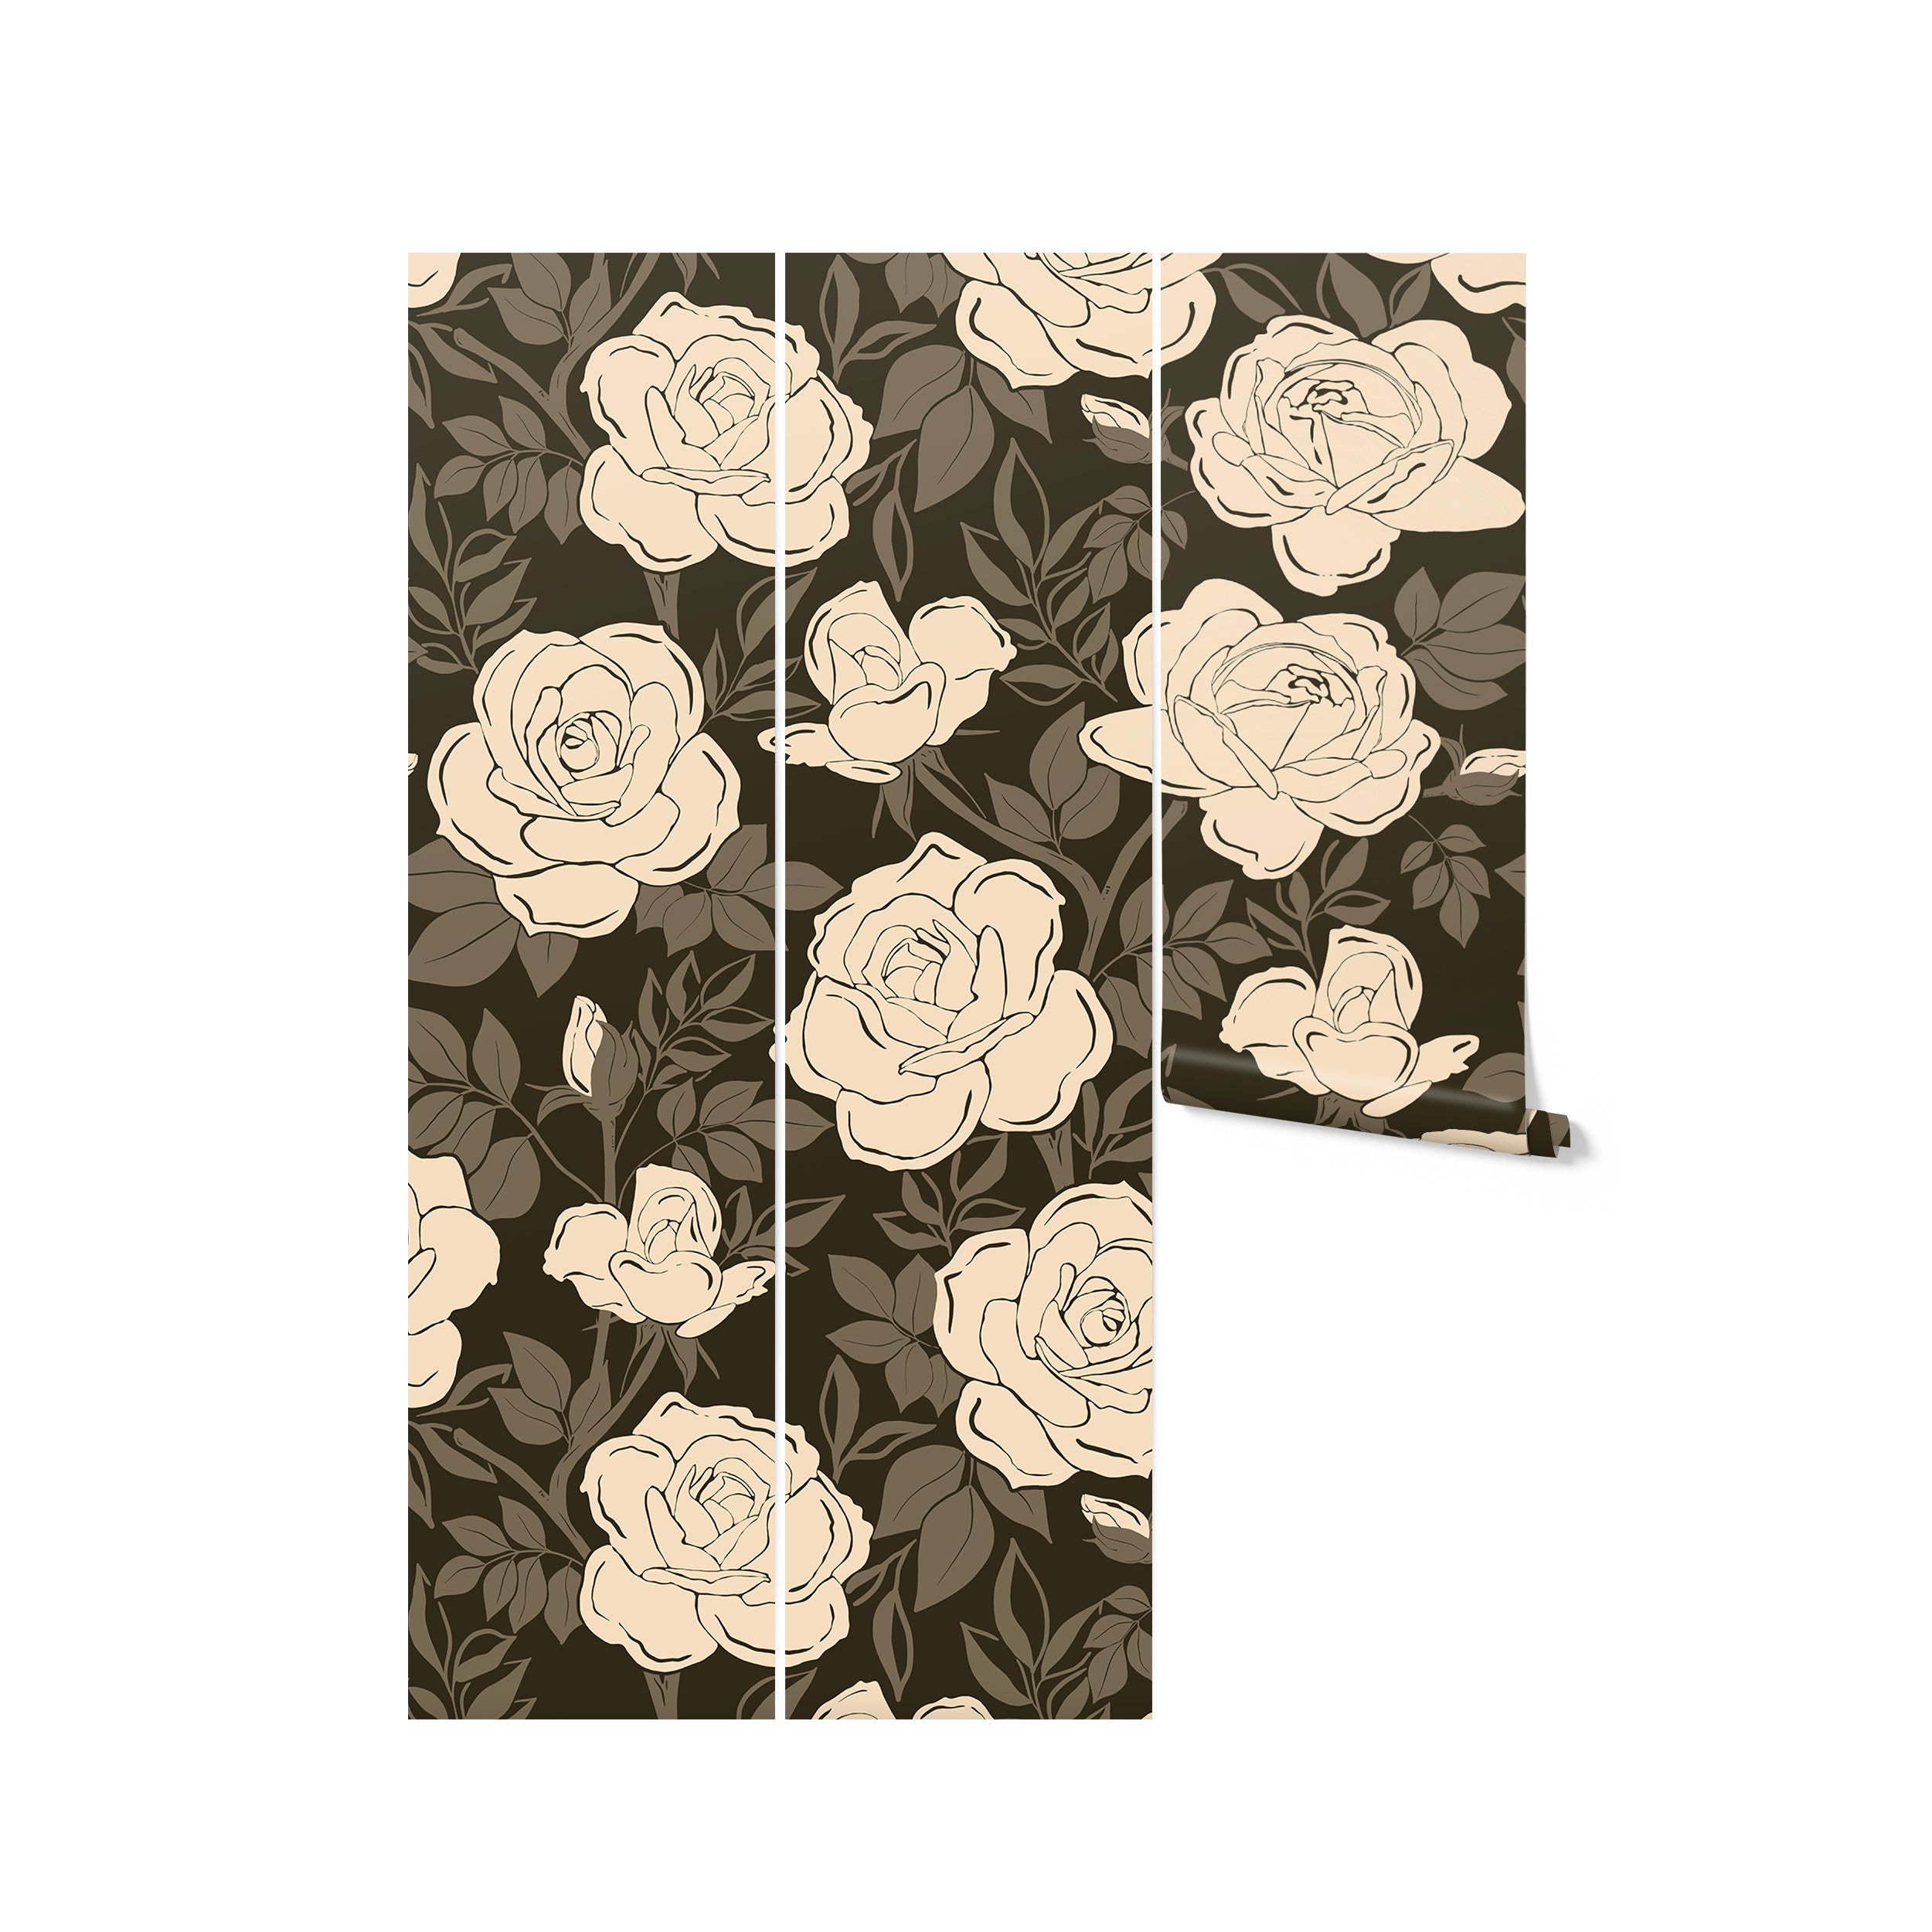 Close-up view of the Forest Rose Wallpaper - 75", depicting large, stylized cream roses with detailed leaves on a dark gray background, offering a dramatic and romantic touch to any interior design